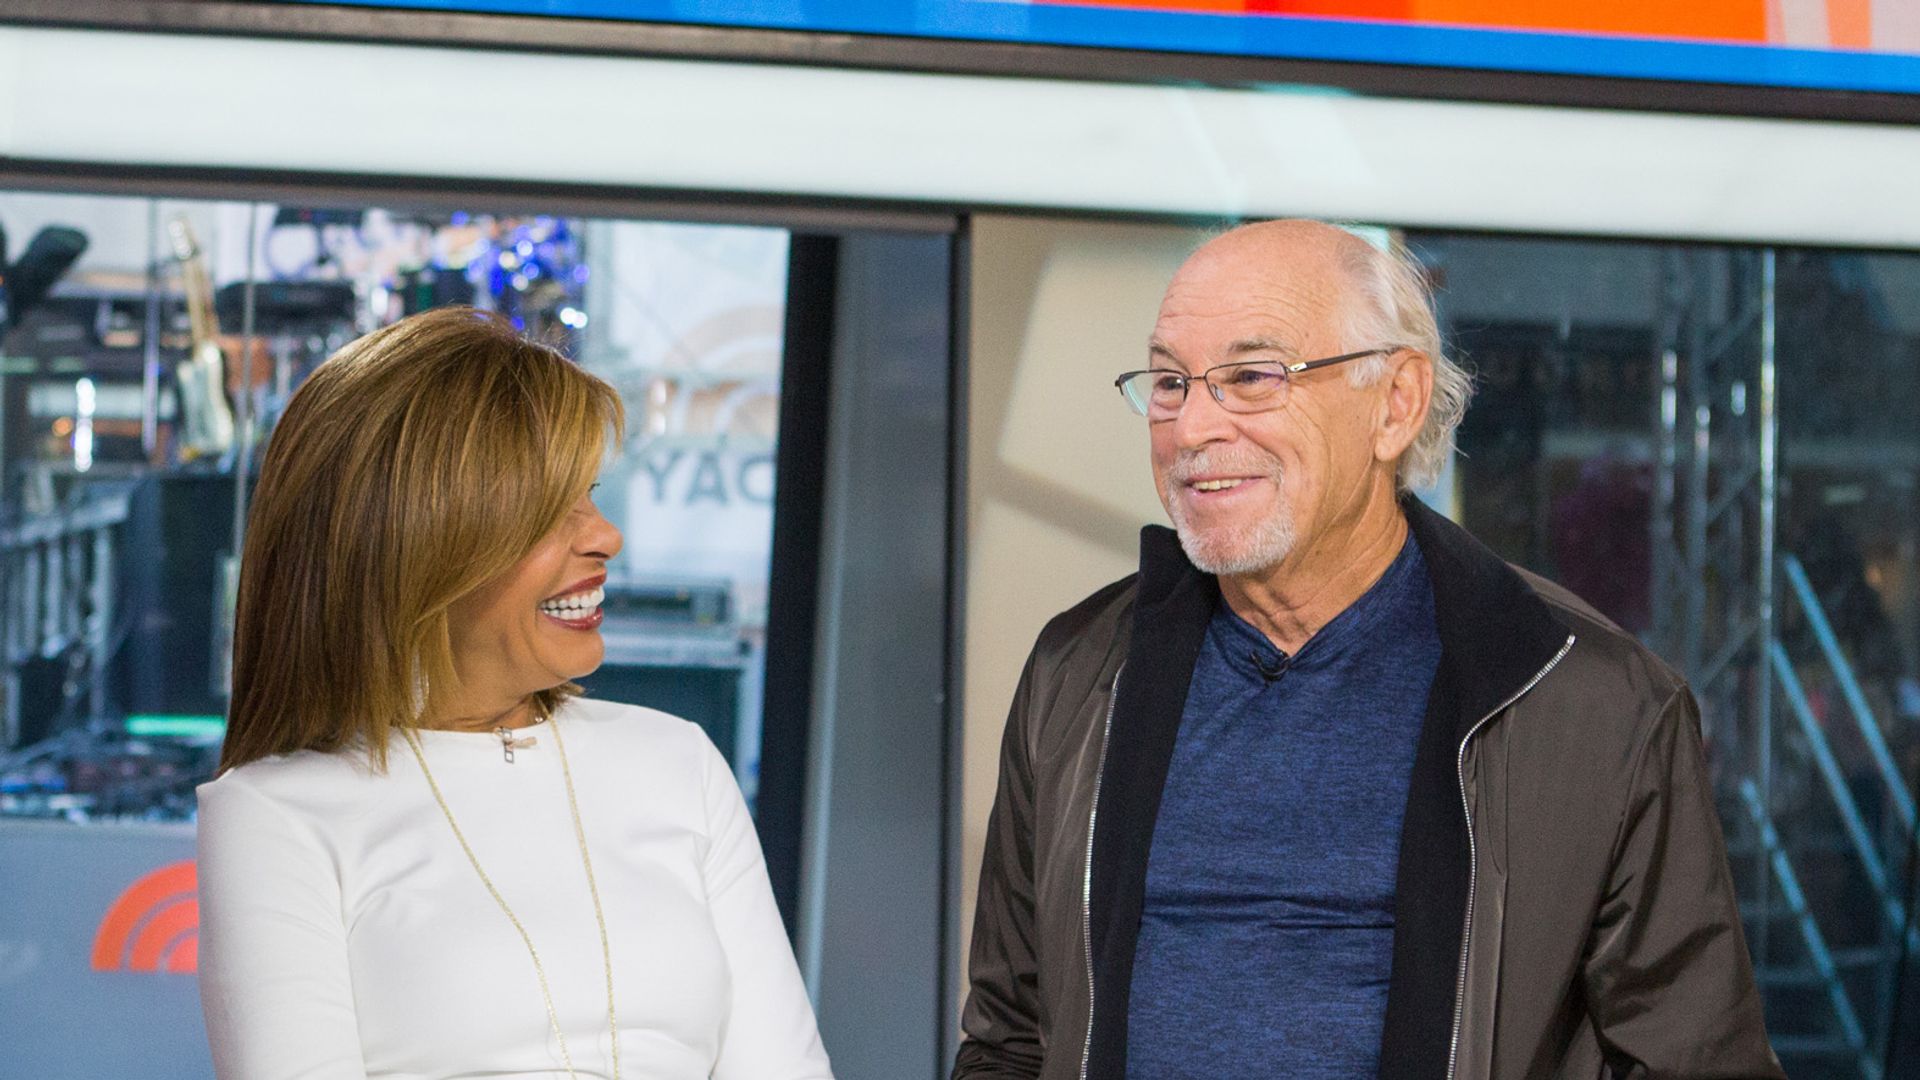 Hoda Kotb and NCIS star LL Cool J pay tribute after death of 'inspiring' Jimmy Buffett